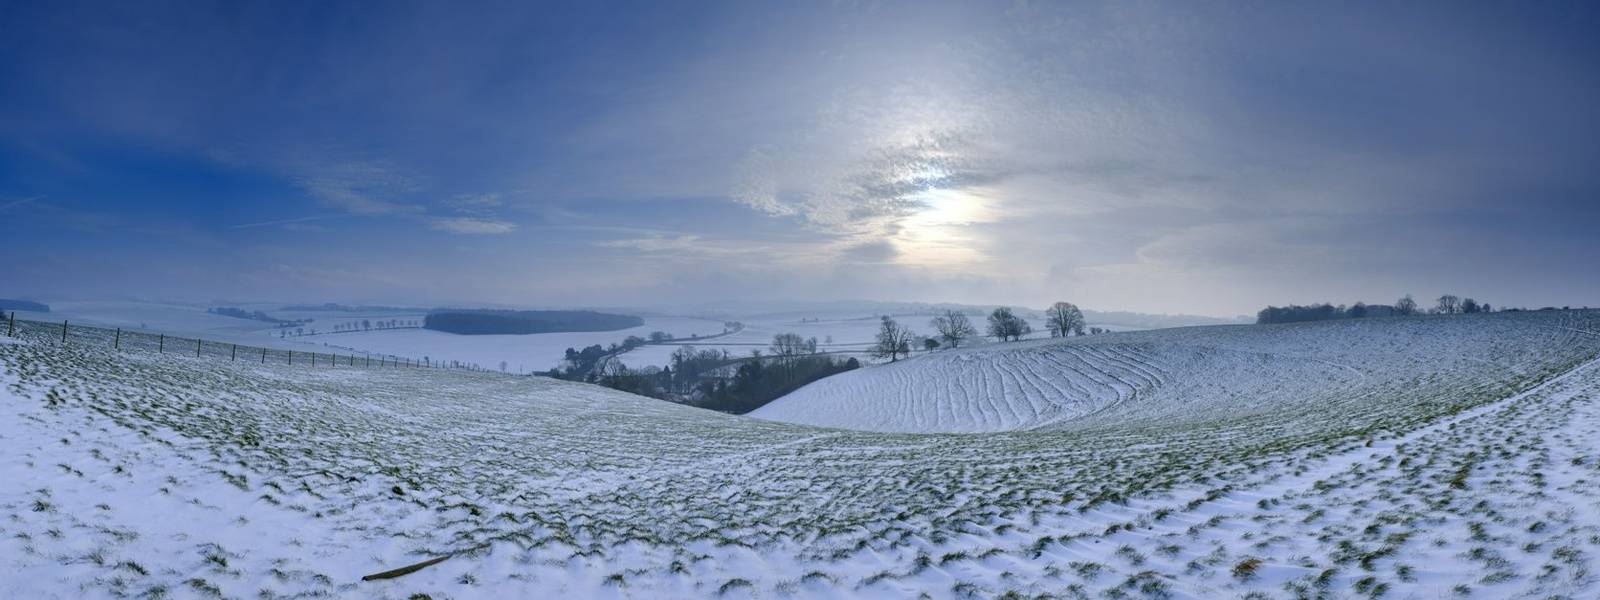 Winter snow scene over Hambledon and the South Downs, Hampshire, UK